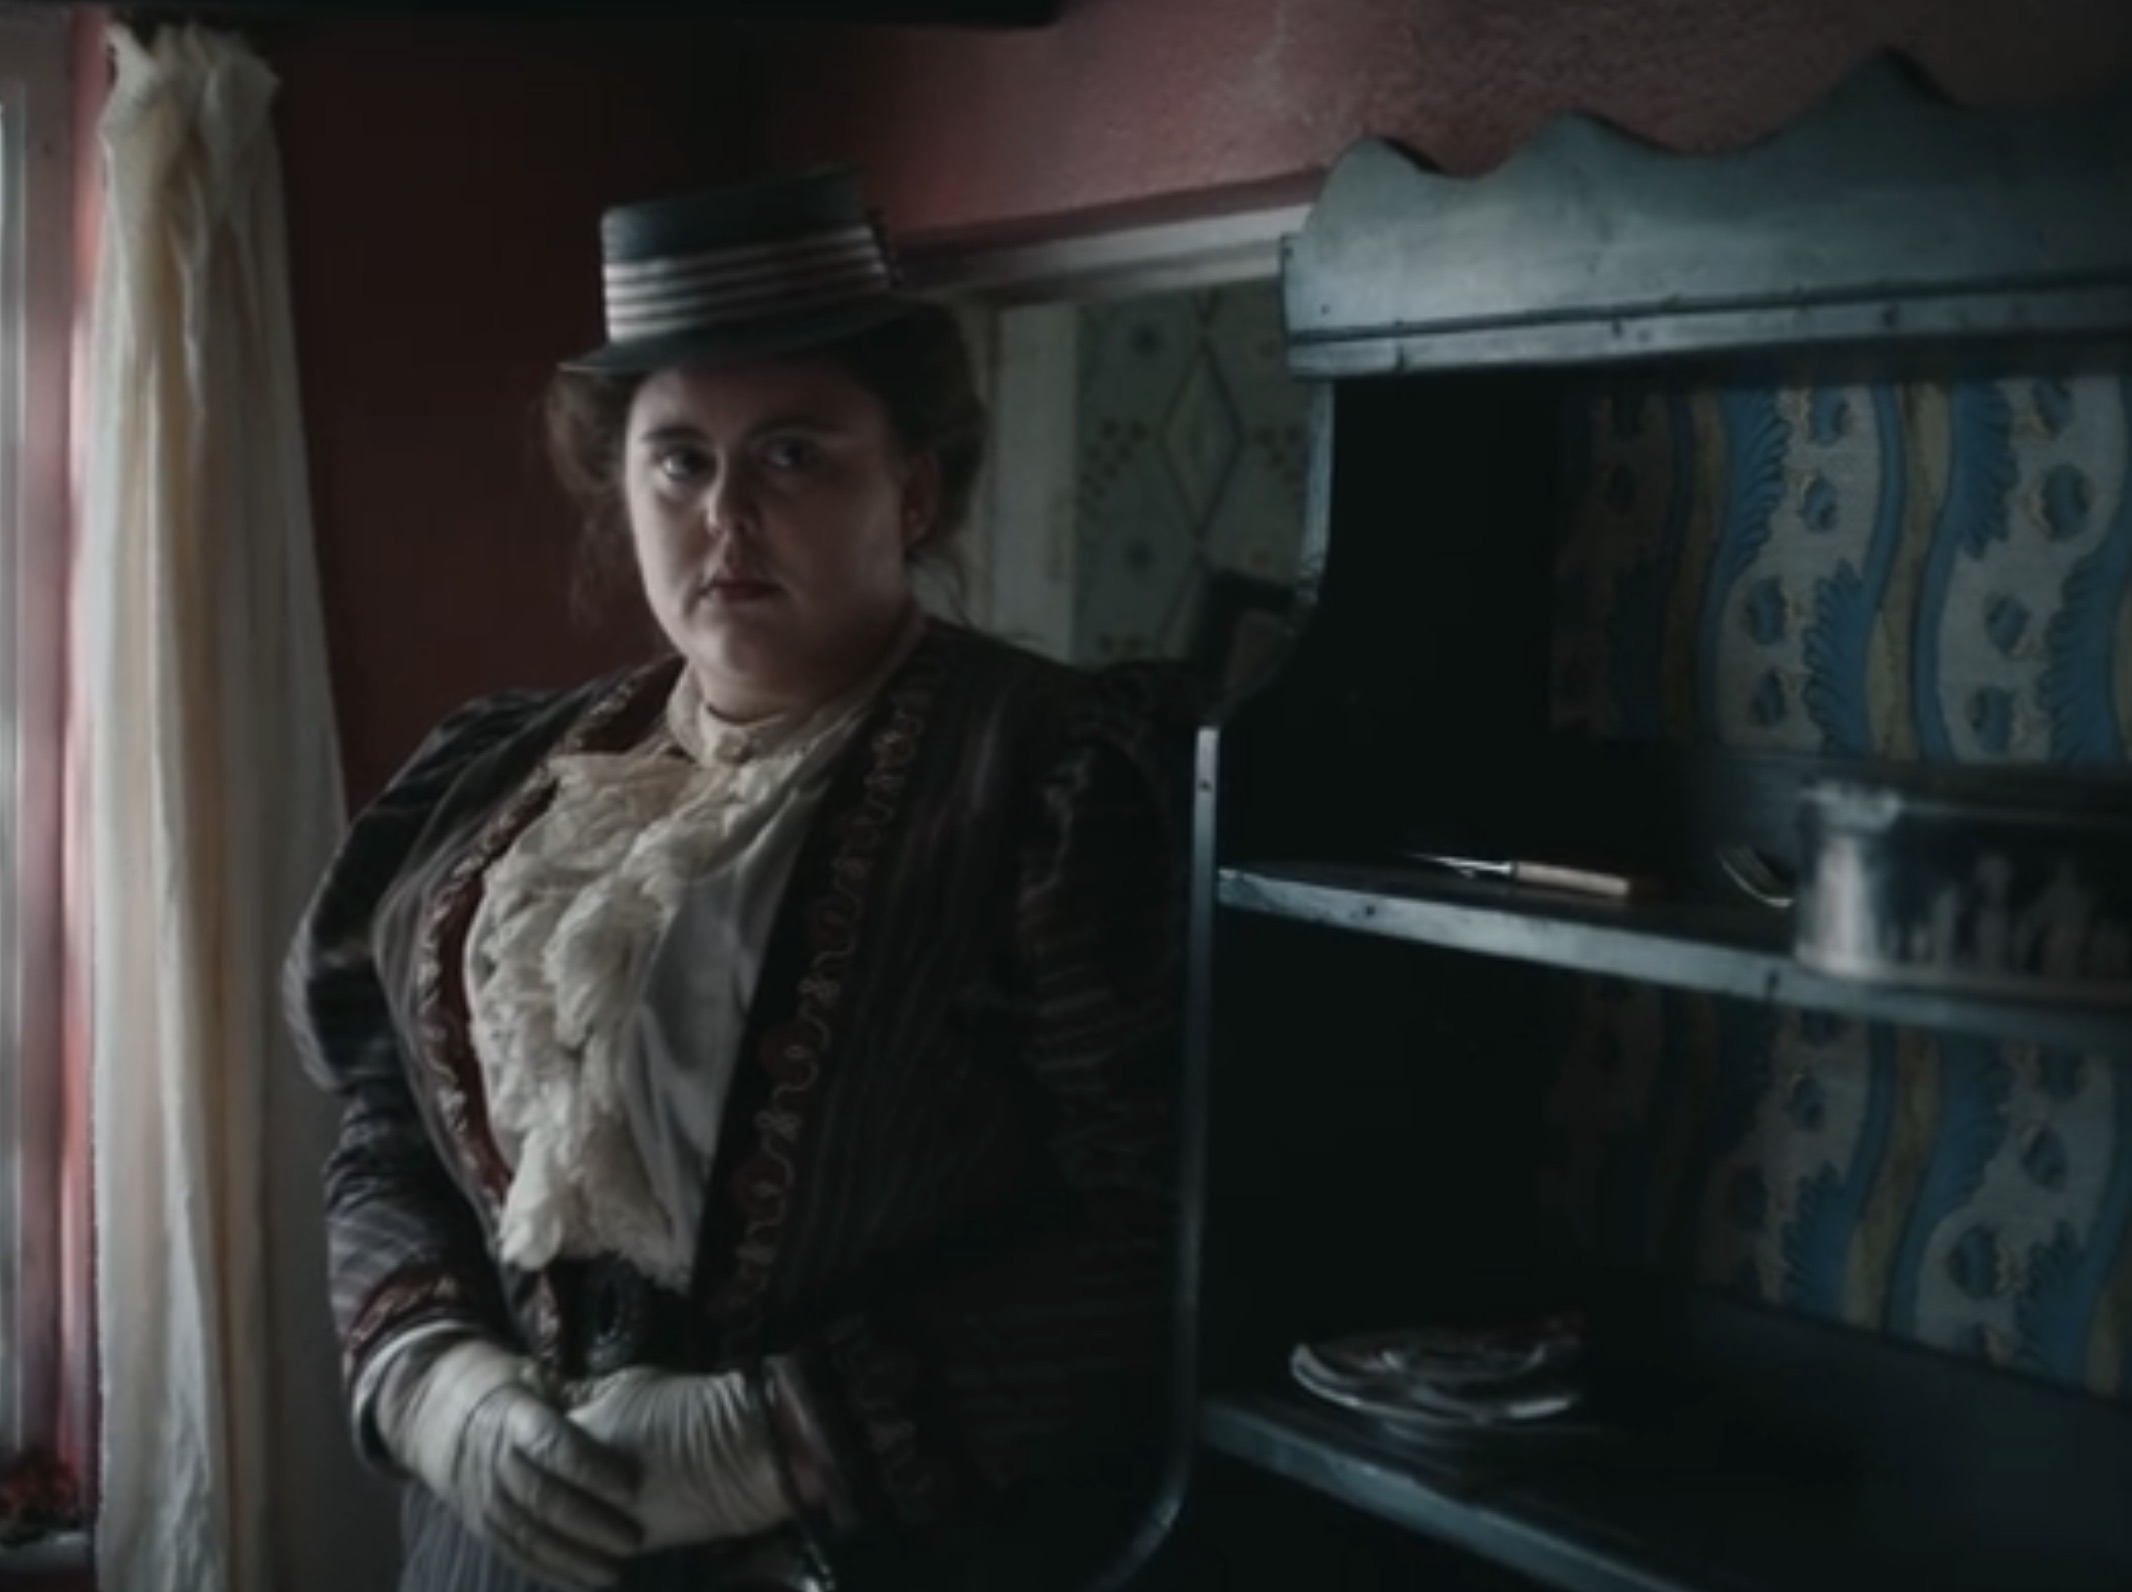 The Electrical Life of Louis Wain Cast - Sharon Rooney as Josephine Wain